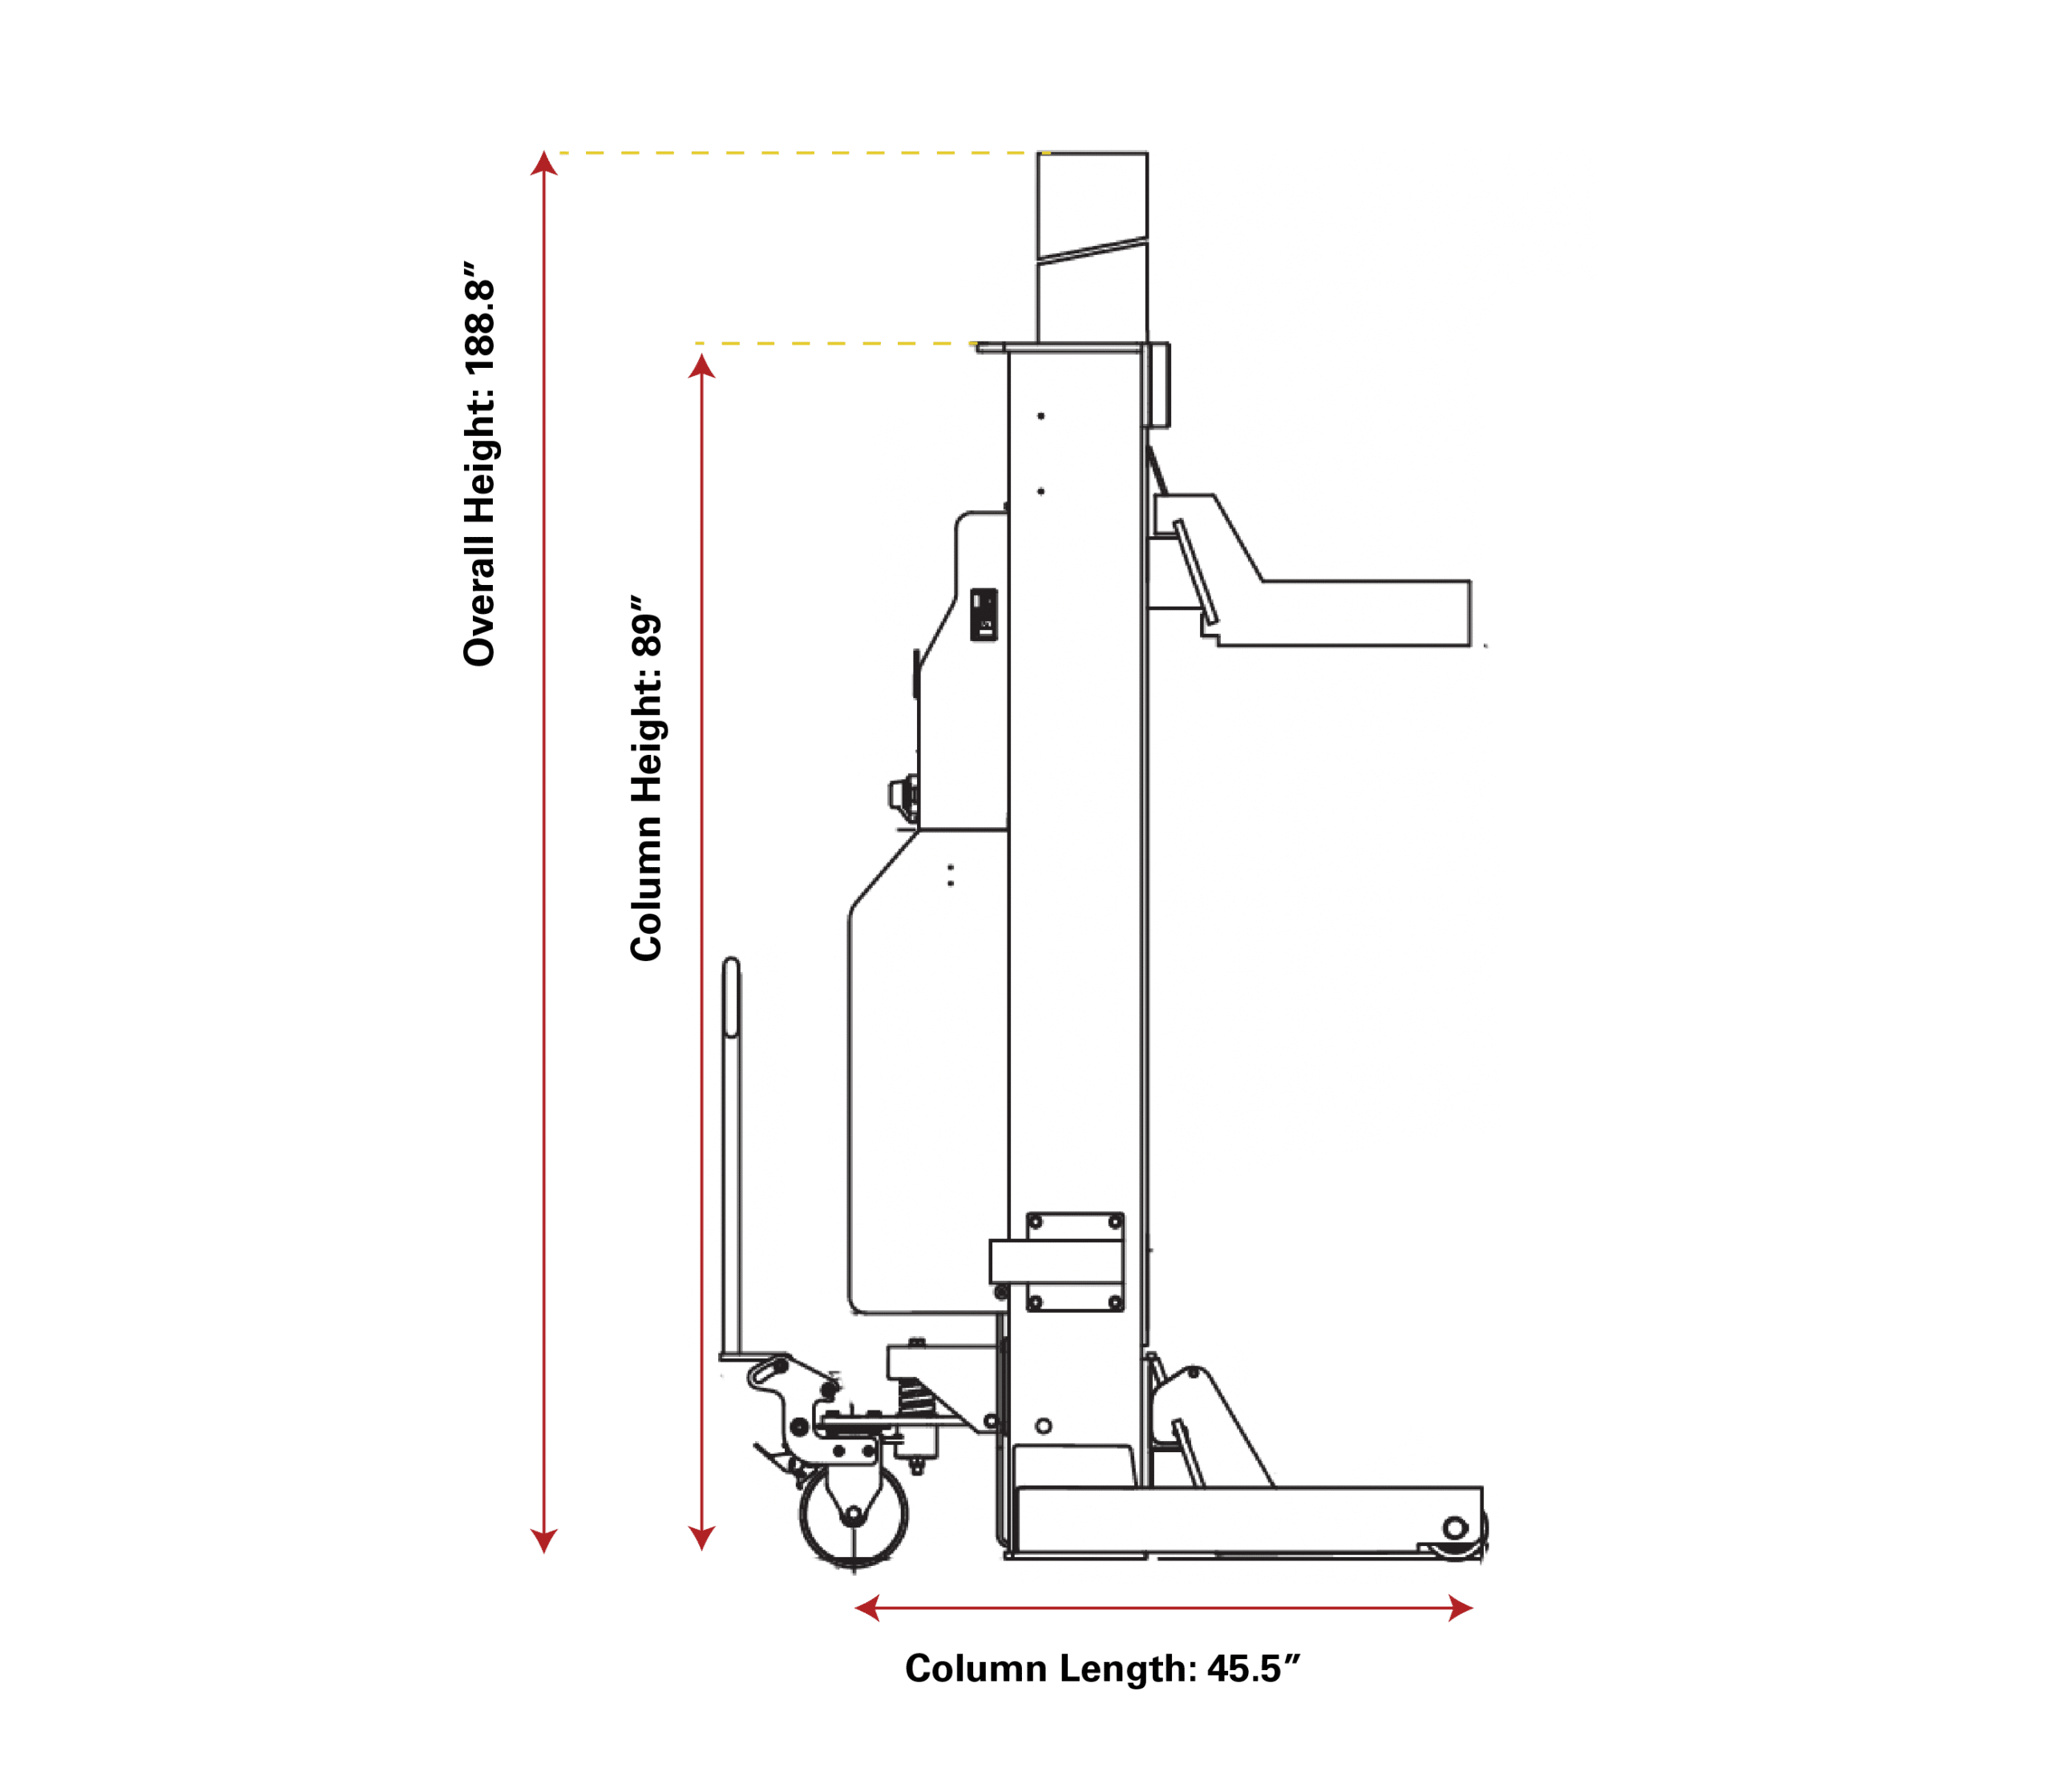 A CAD diagram illustrating the height, width, and depth dimensions of a single Coats Mobile Column Lift